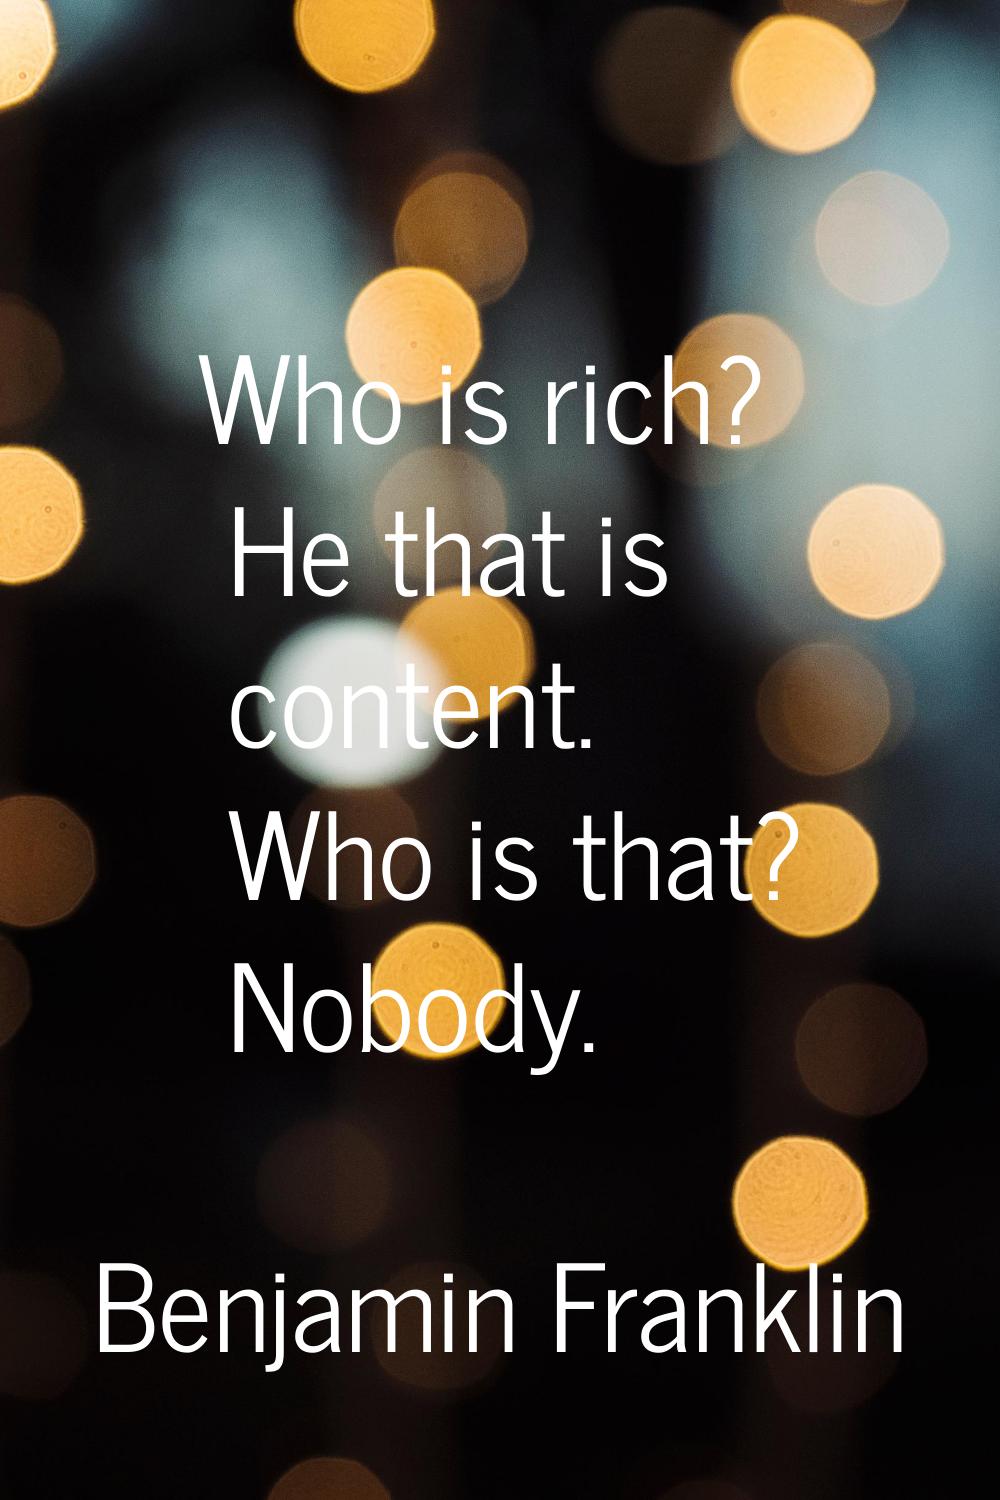 Who is rich? He that is content. Who is that? Nobody.